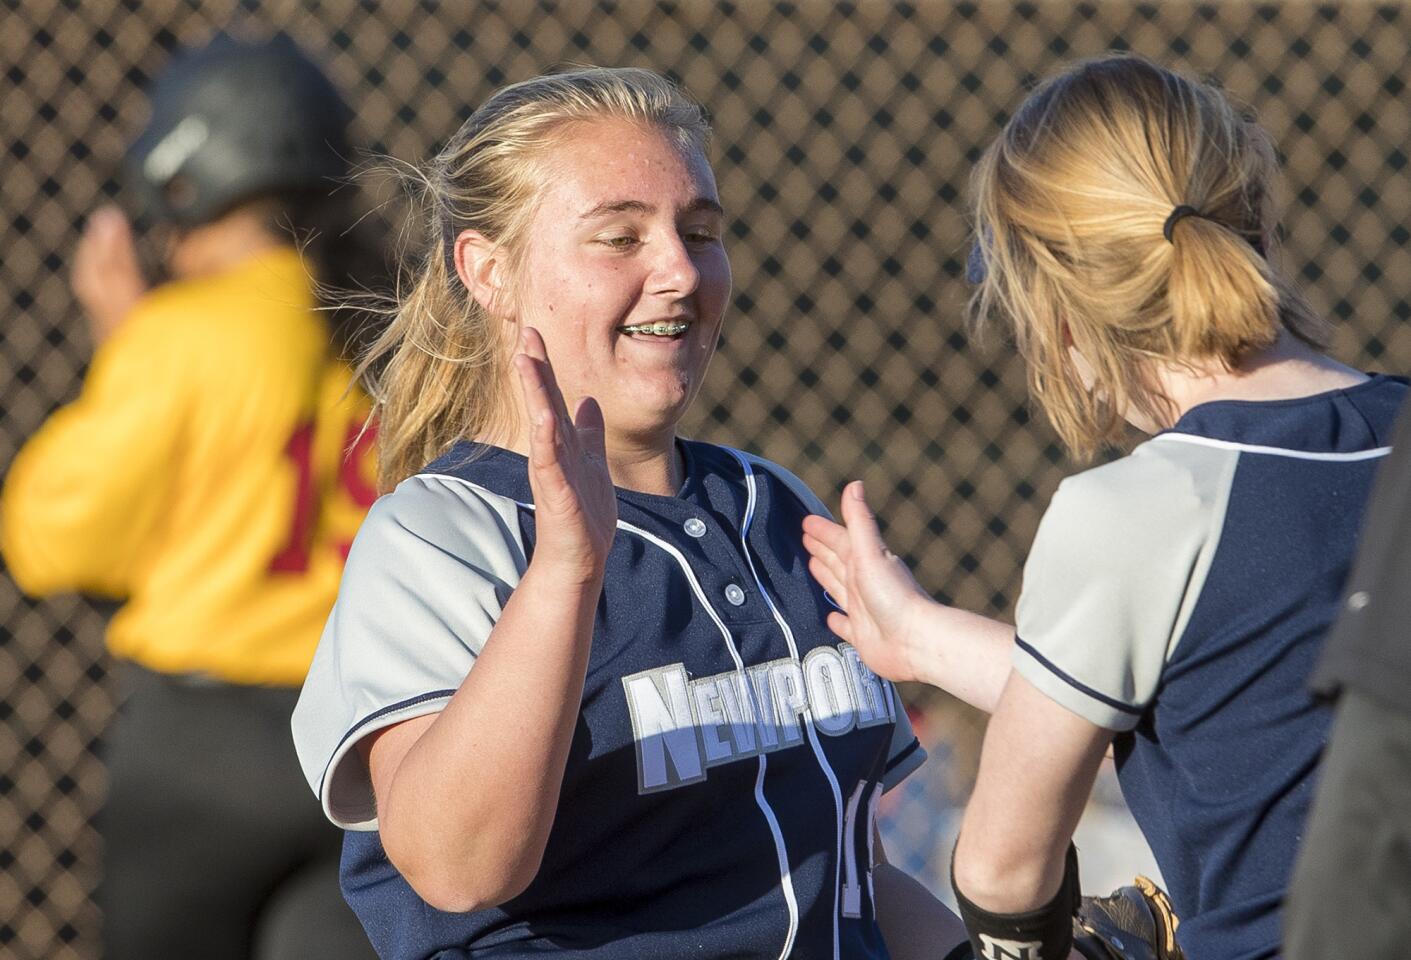 Newport Harbor's Clare Austin gets a high five from teammate Lily Larkins after closing out the game against Estancia on Wednesday, February 28.